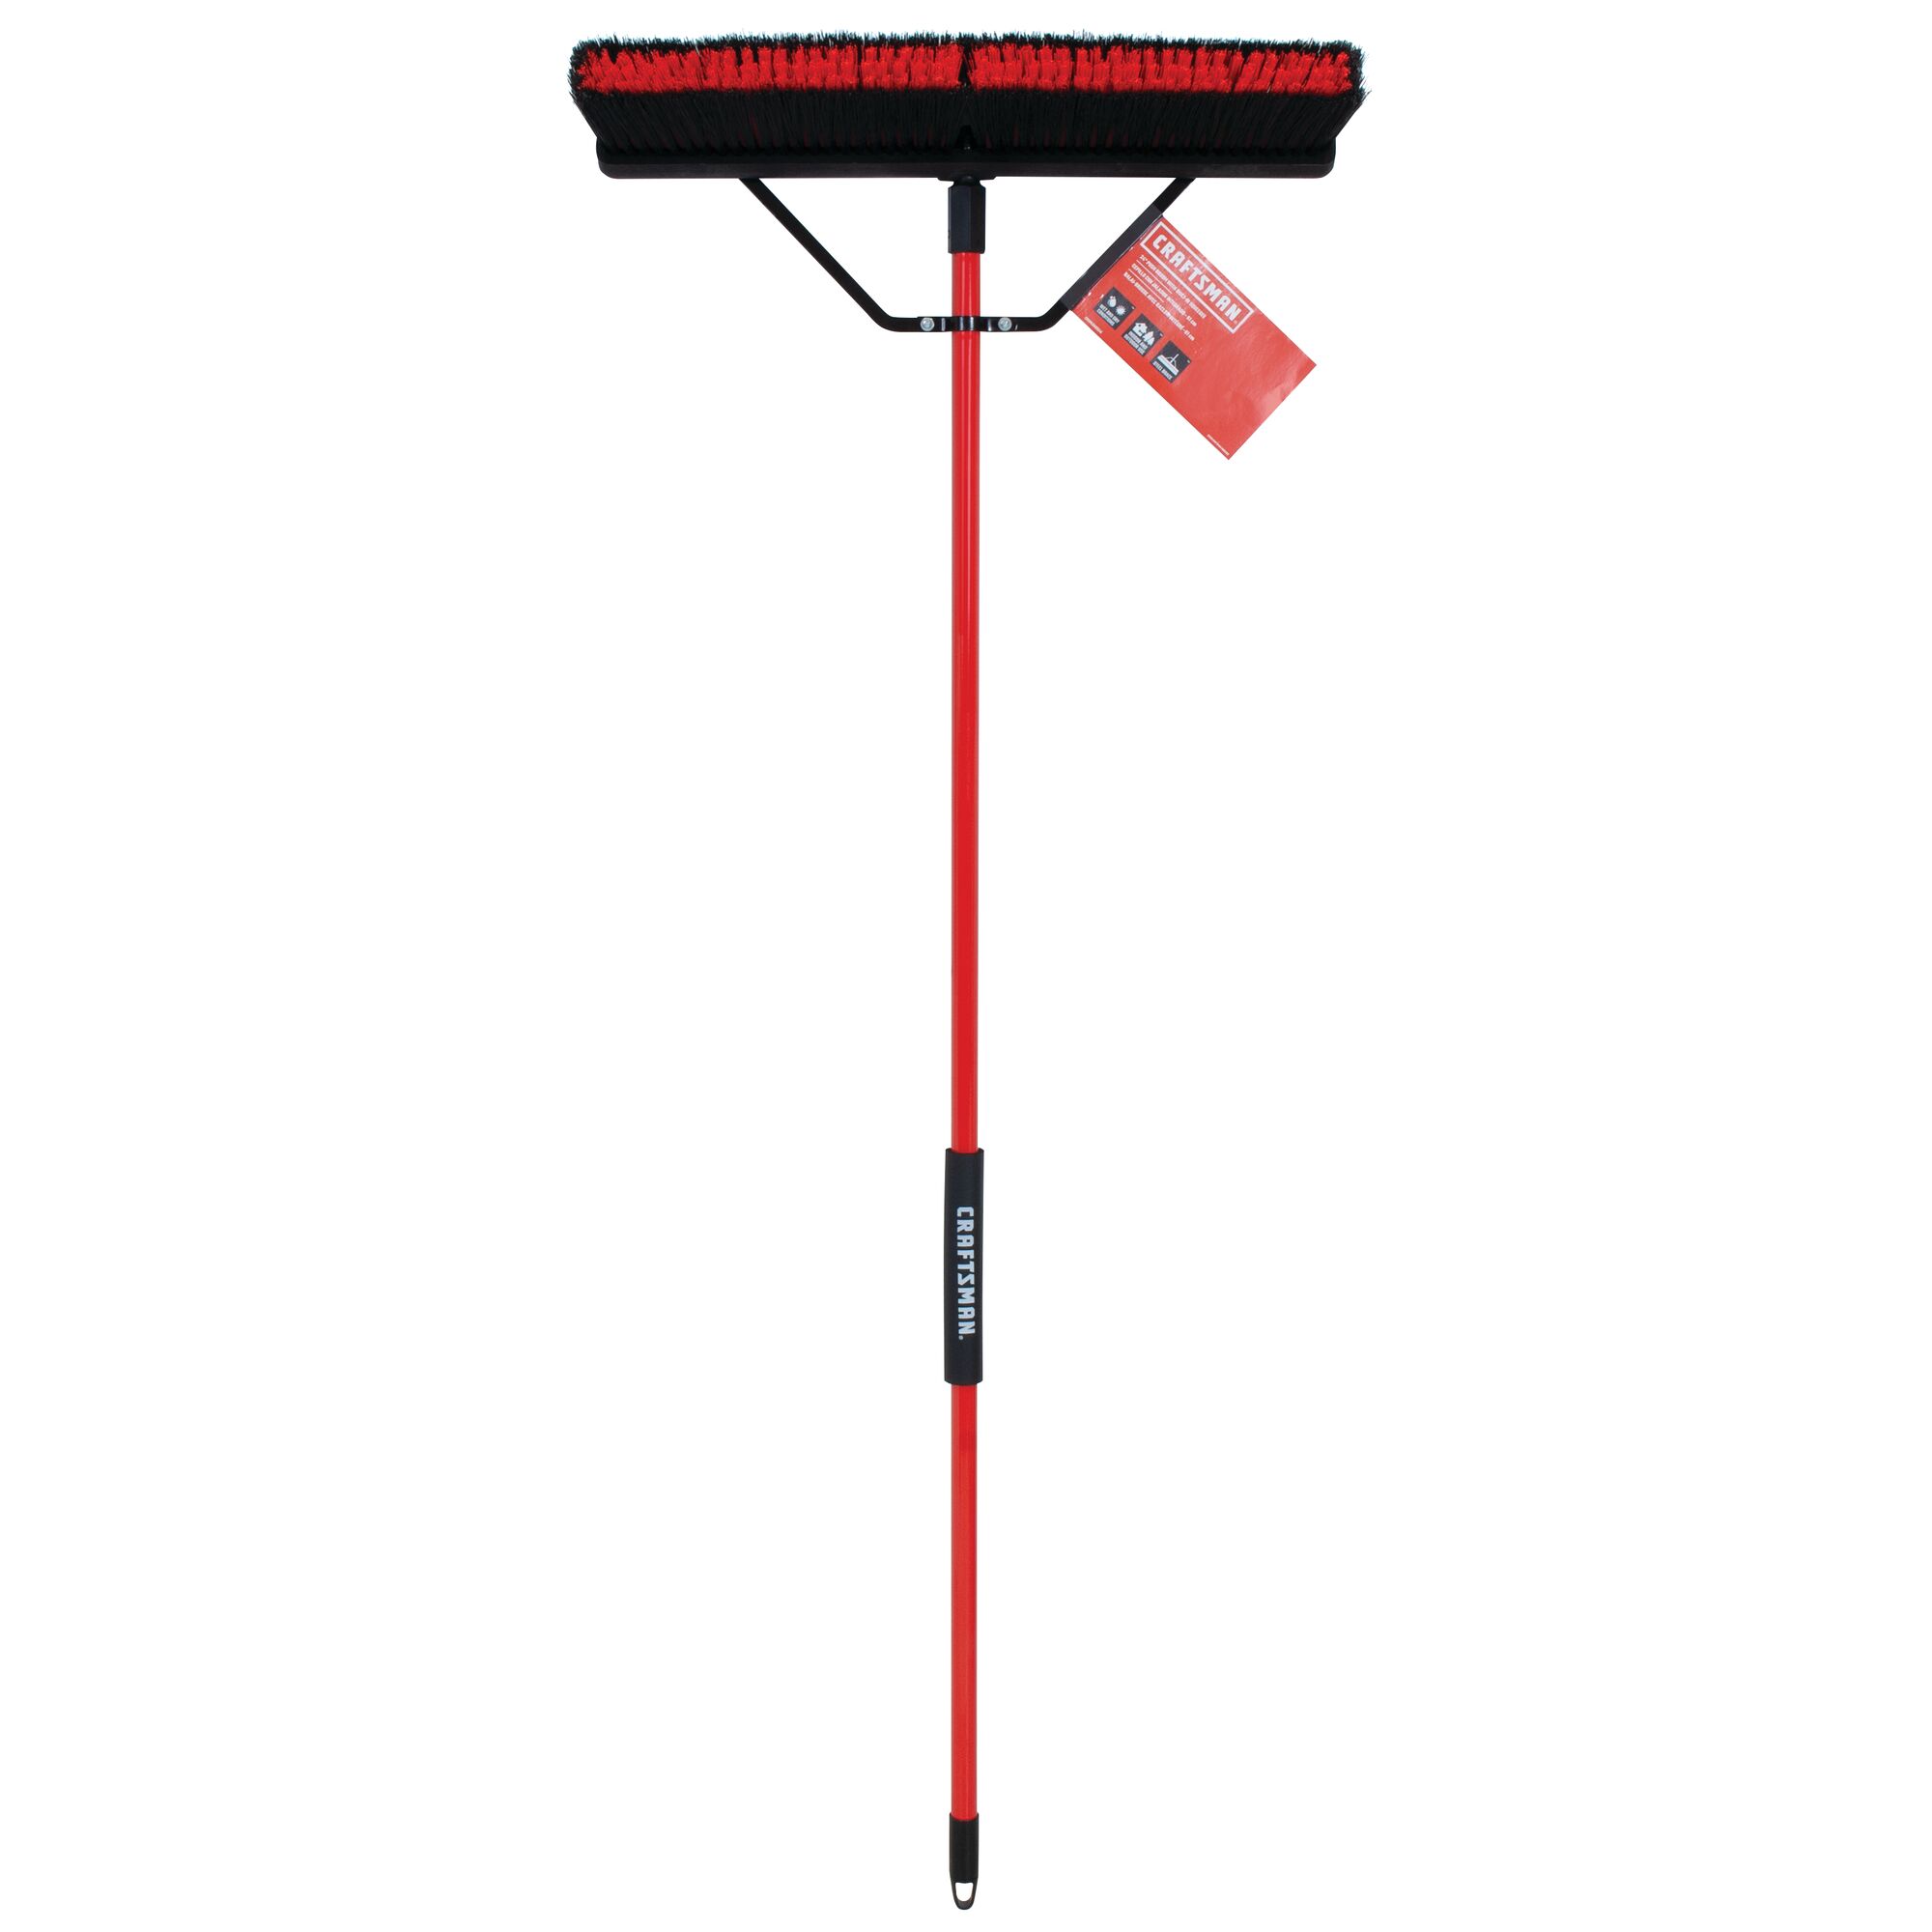 24 inch push broom with built in squeegee.